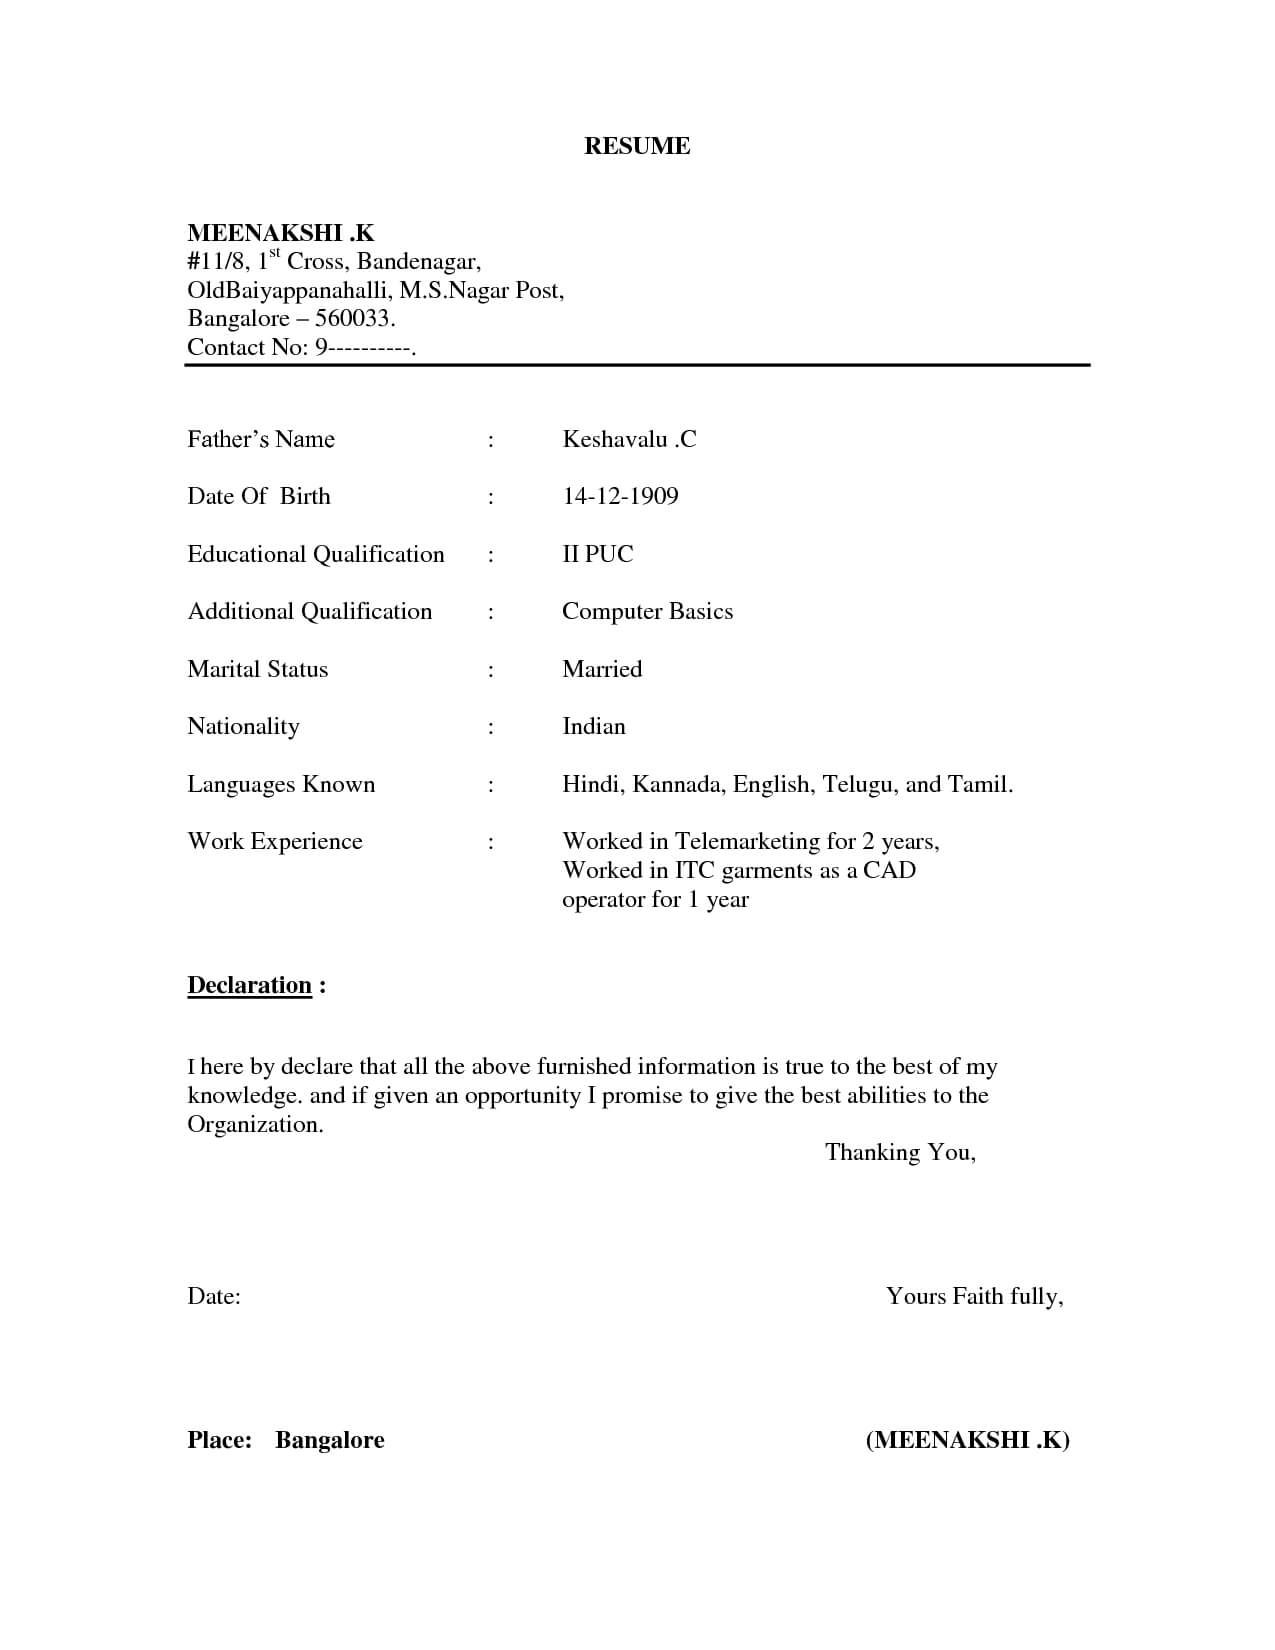 Pinbhushan Computer On Download Resume | Basic Resume In How To Write A Work Report Template